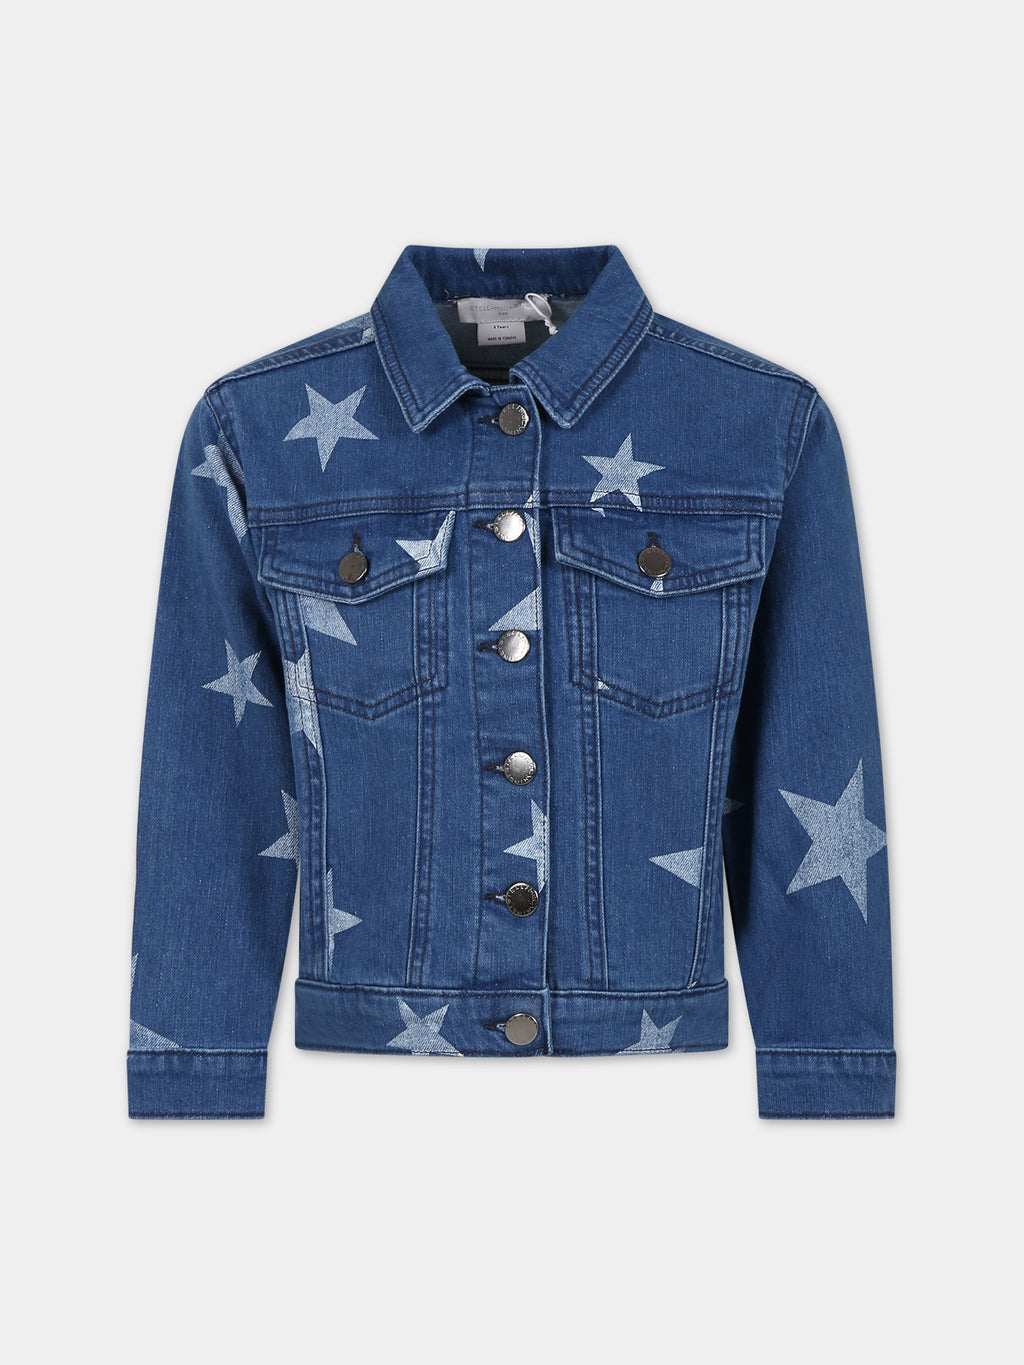 Blue jacket for girl with stars